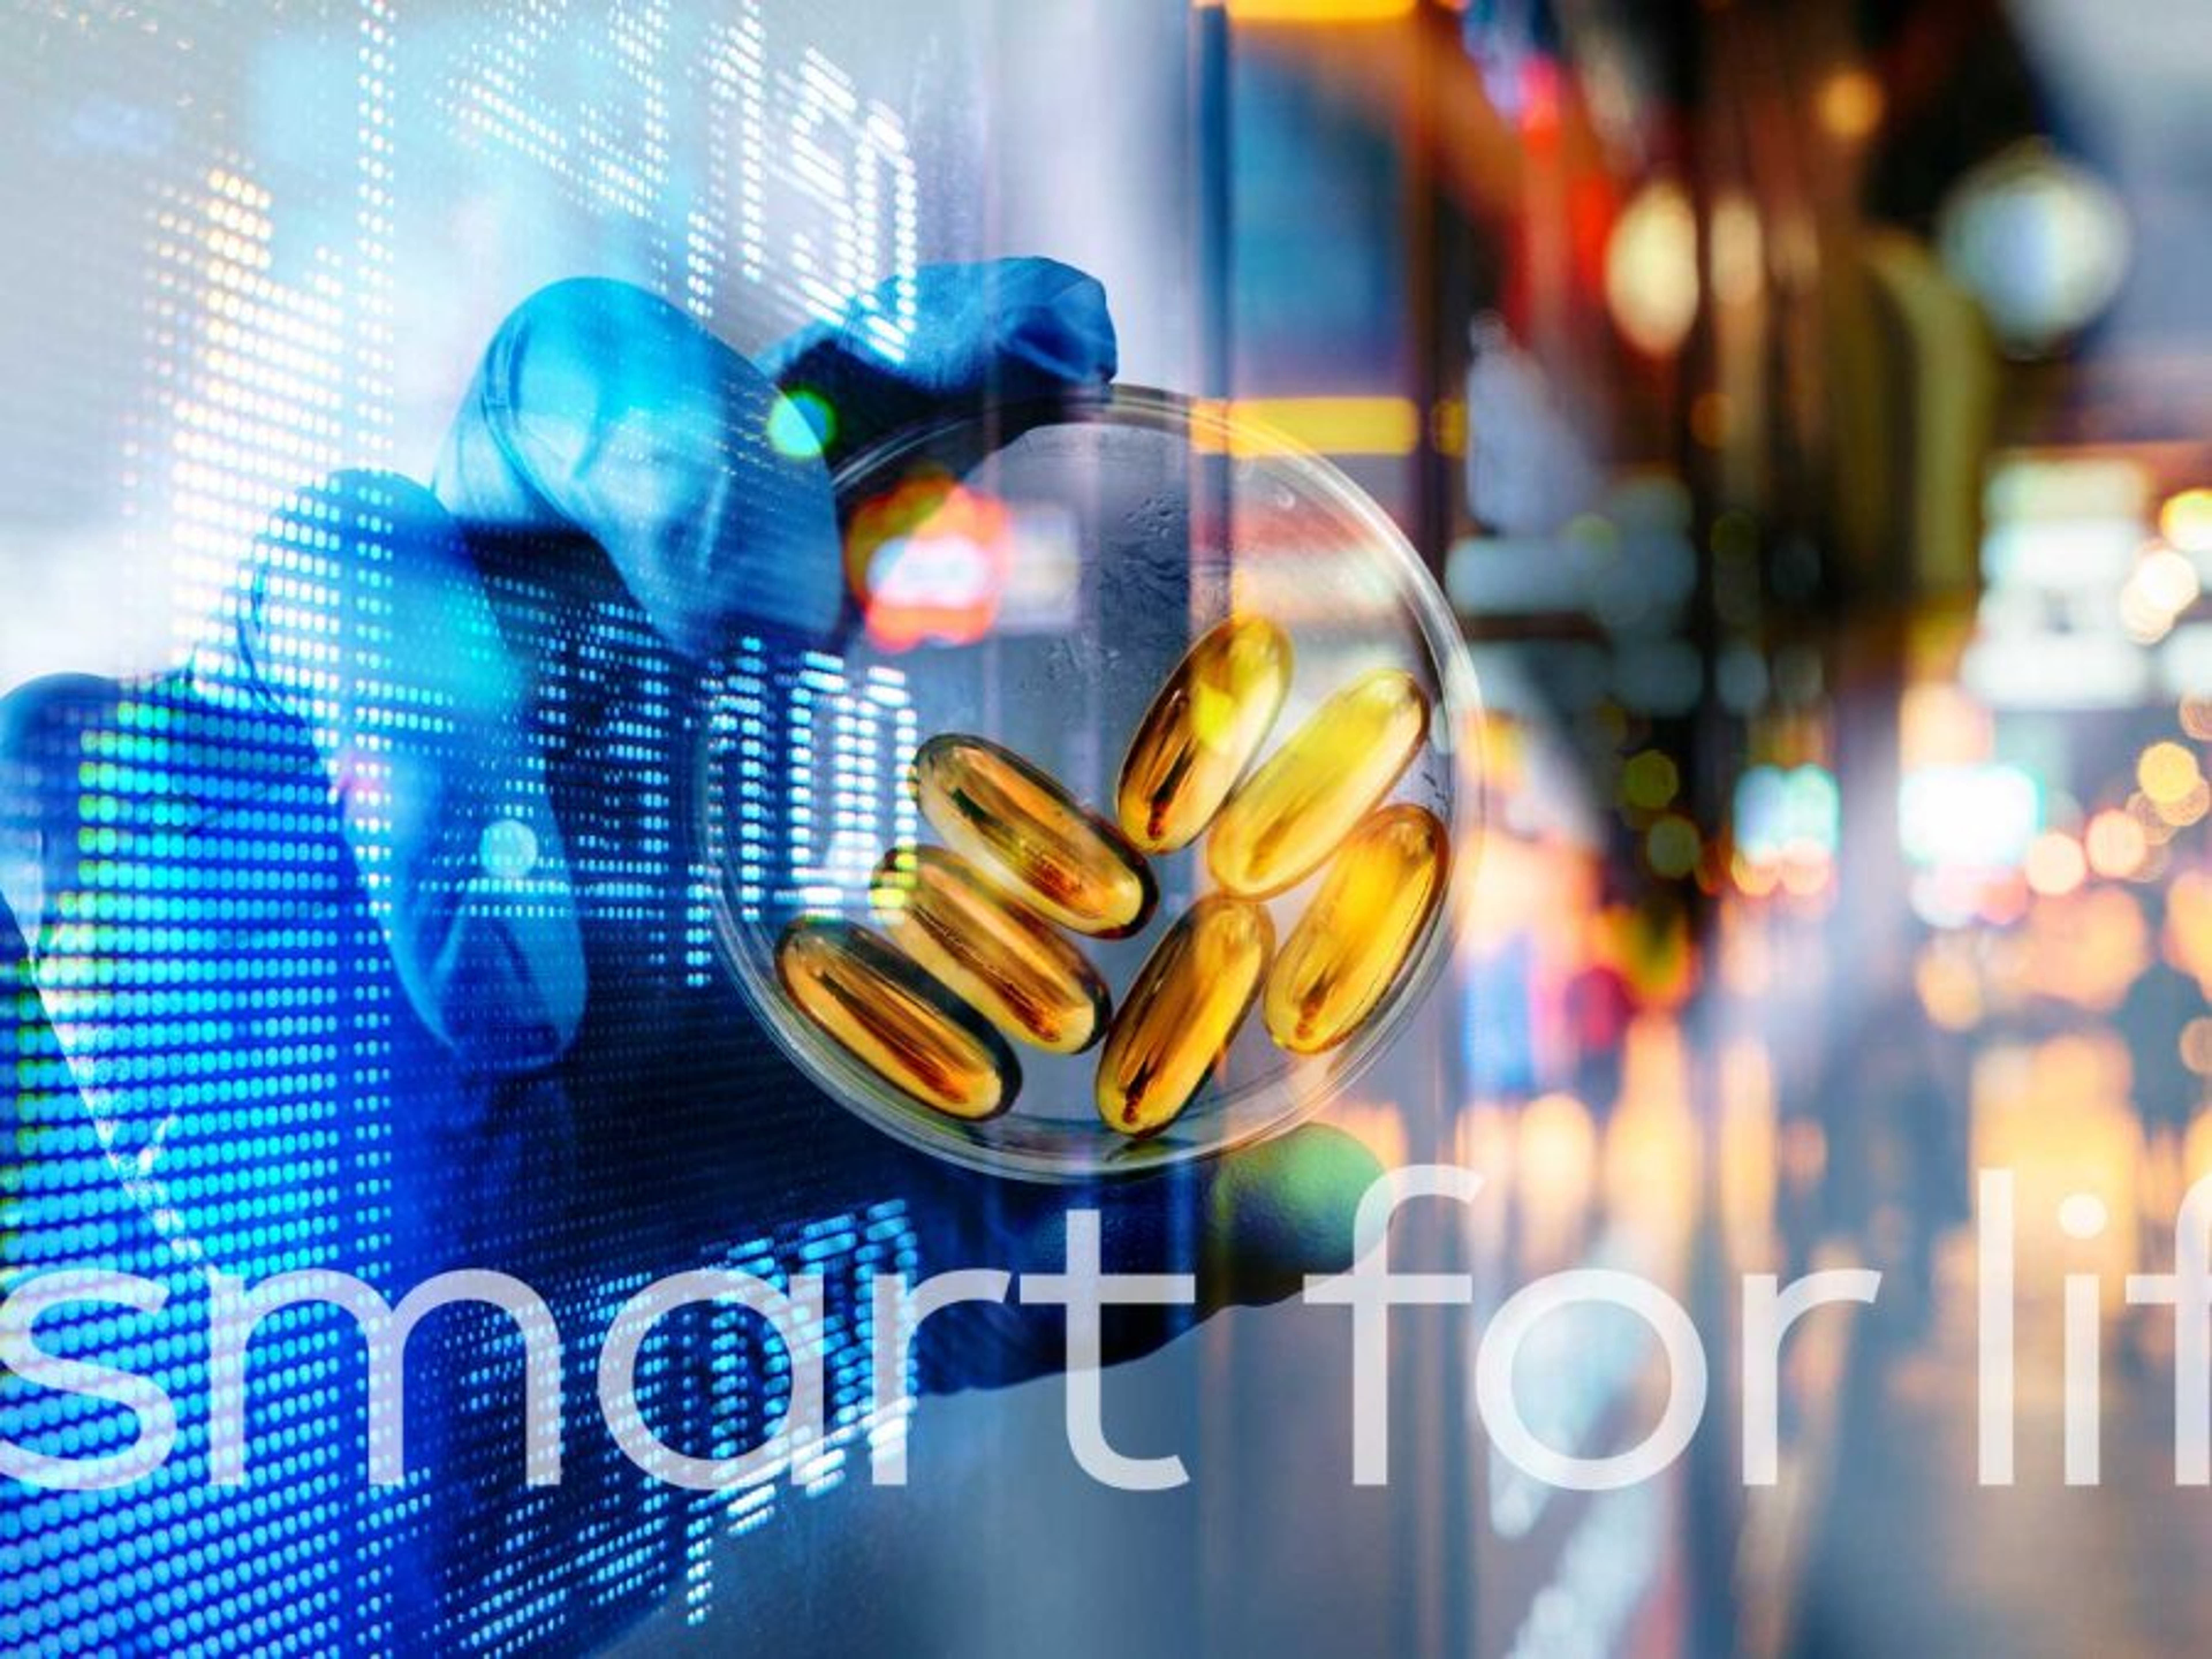 EXCLUSIVE: Smart for Life Shares Plan To Scoop A Premier Nutraceuticals Company